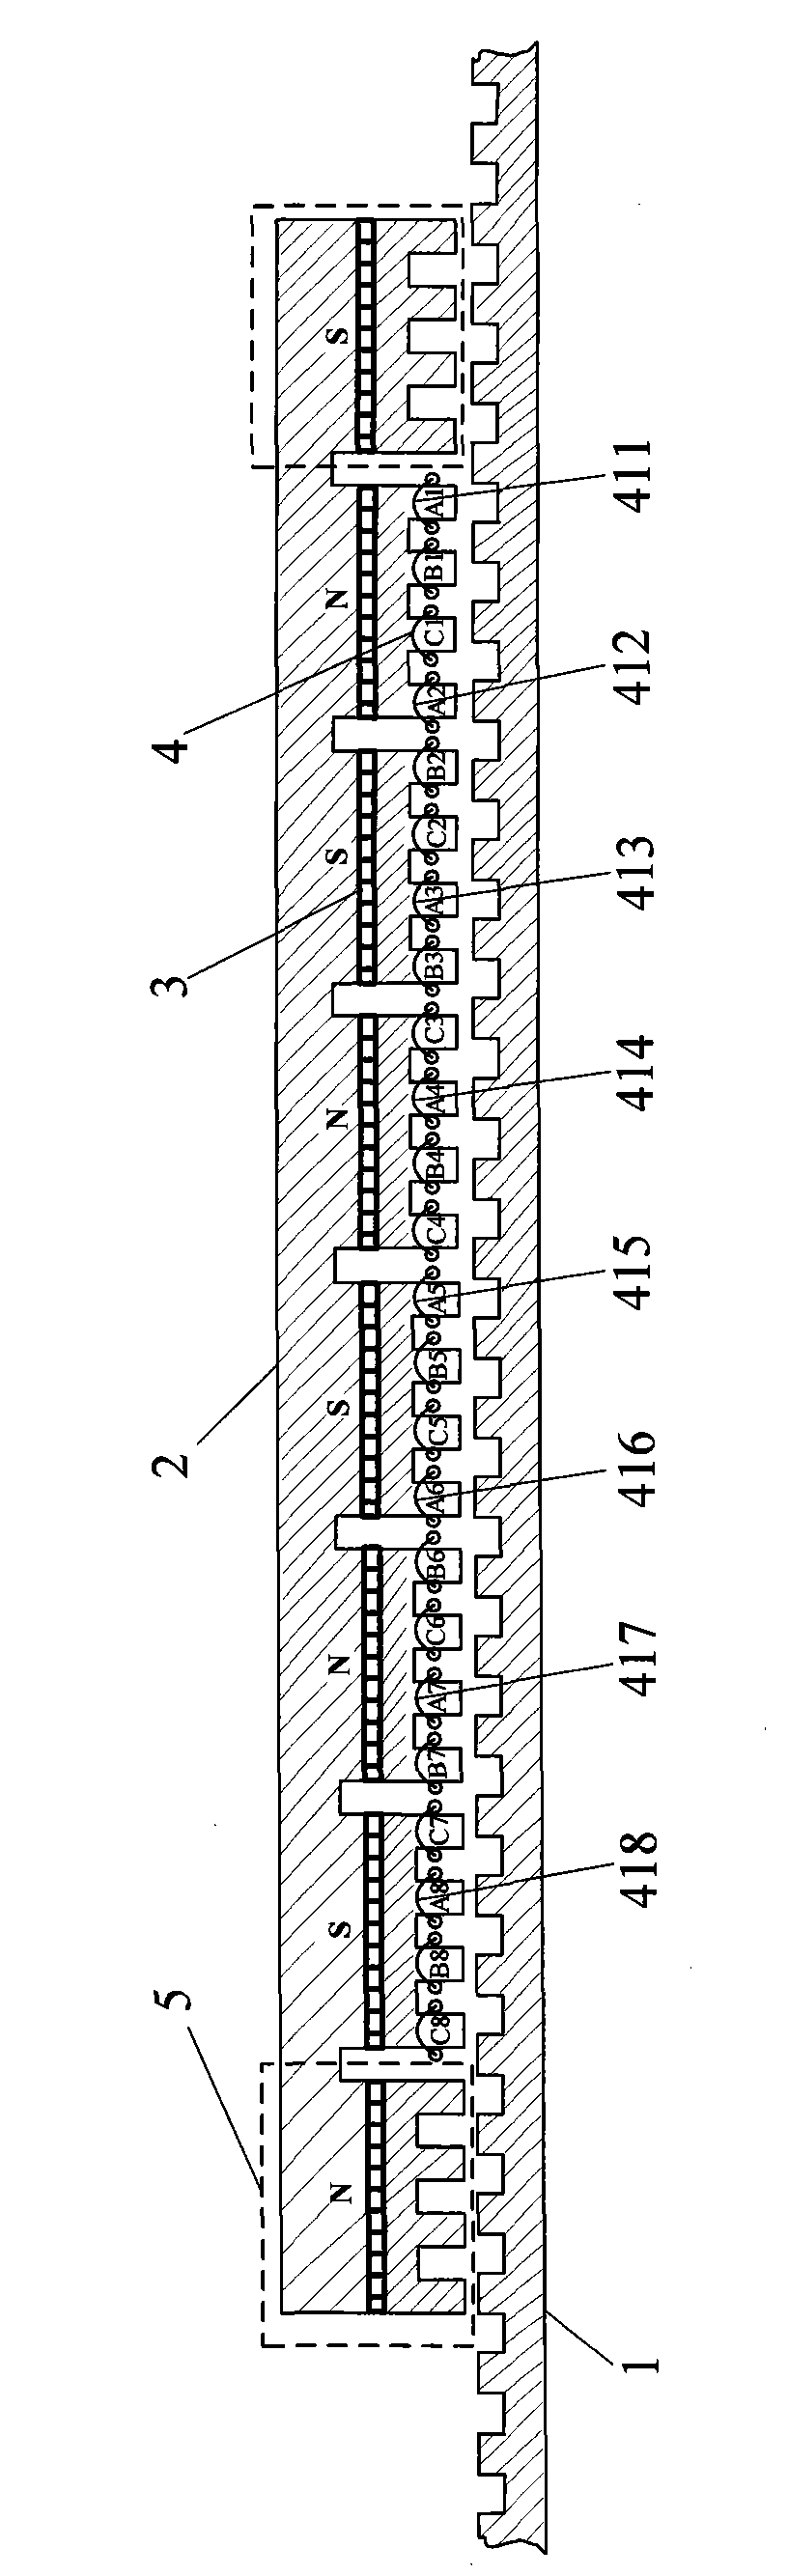 Multiphase long-stator primary permanent magnet linear motor